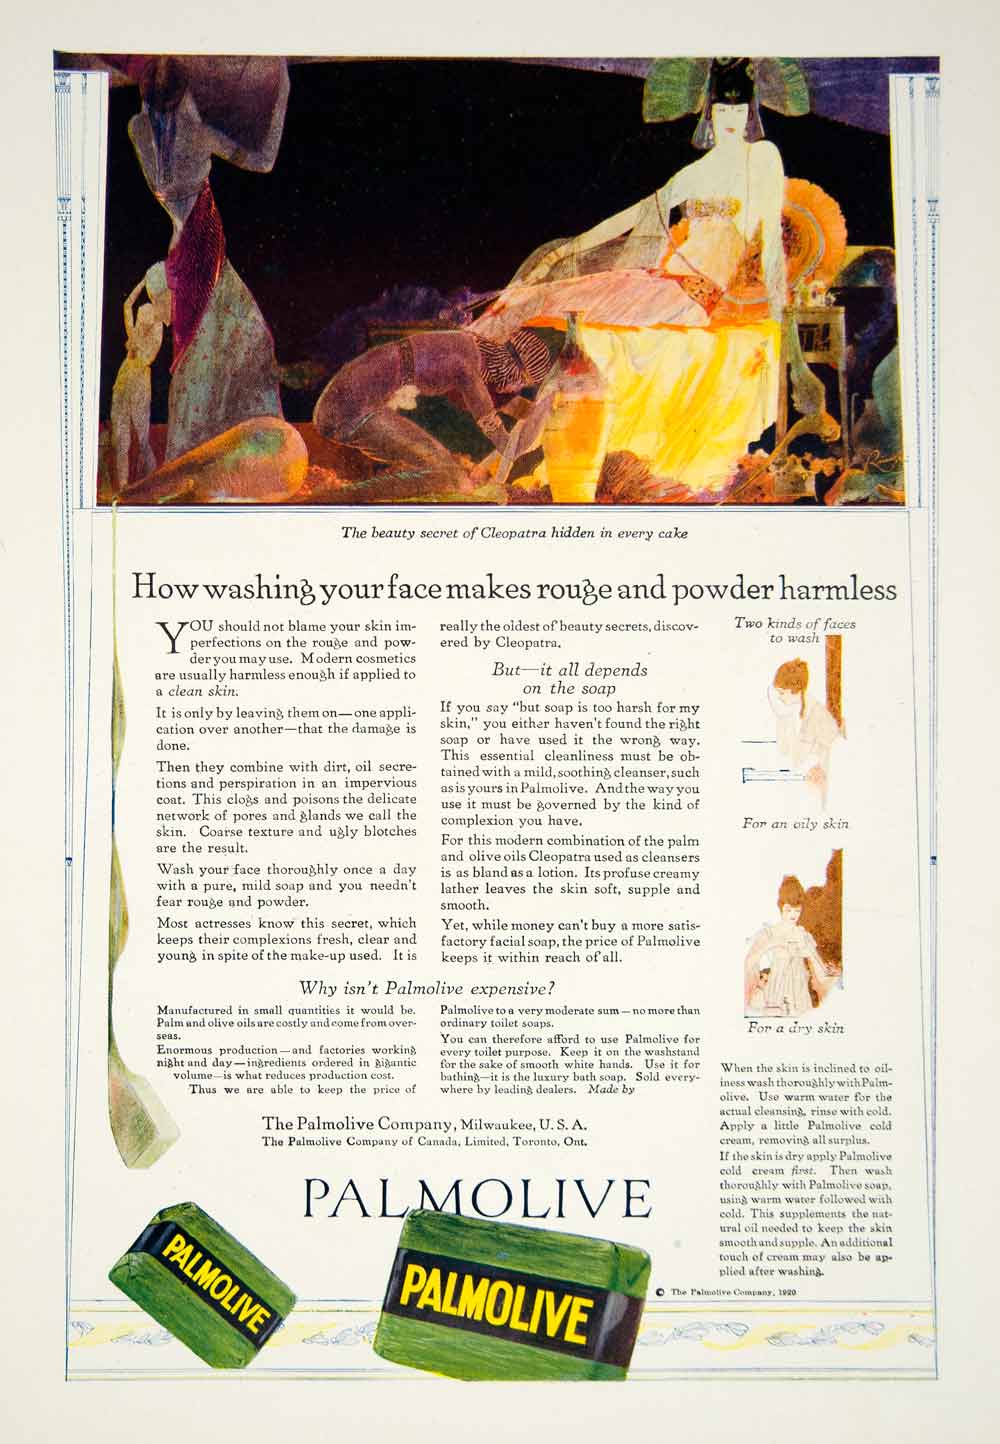 1921 Ad Vintage Palmolive Face Soap Dry Skin Care Cleopatra Queen Egypt YPP2